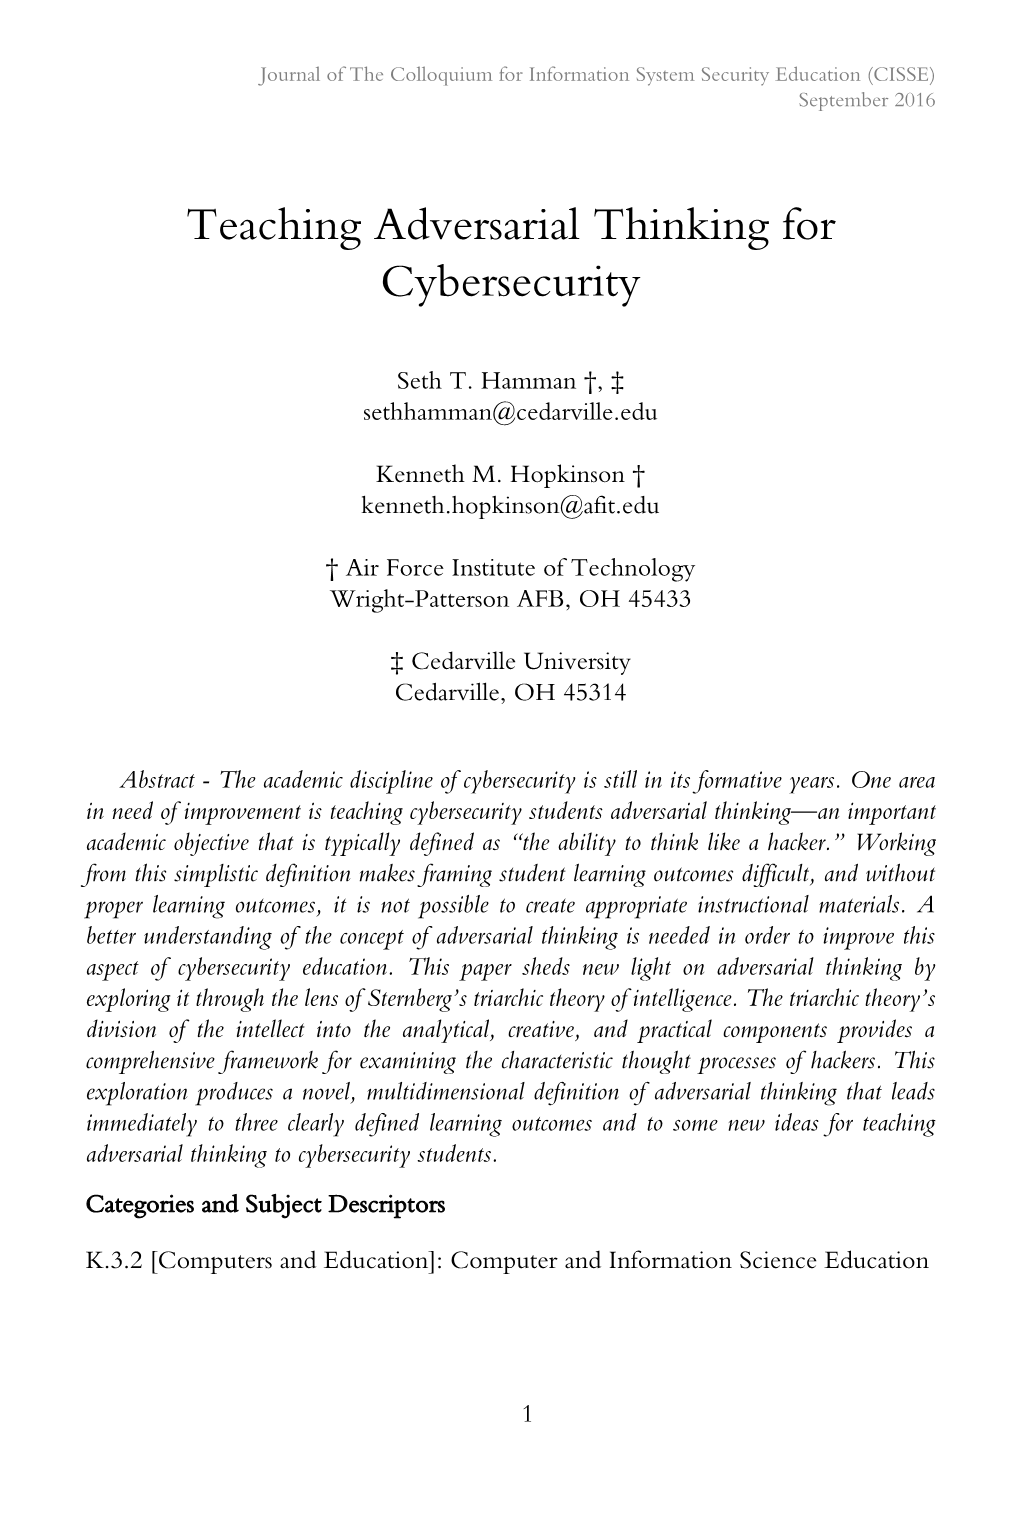 Teaching Adversarial Thinking for Cybersecurity